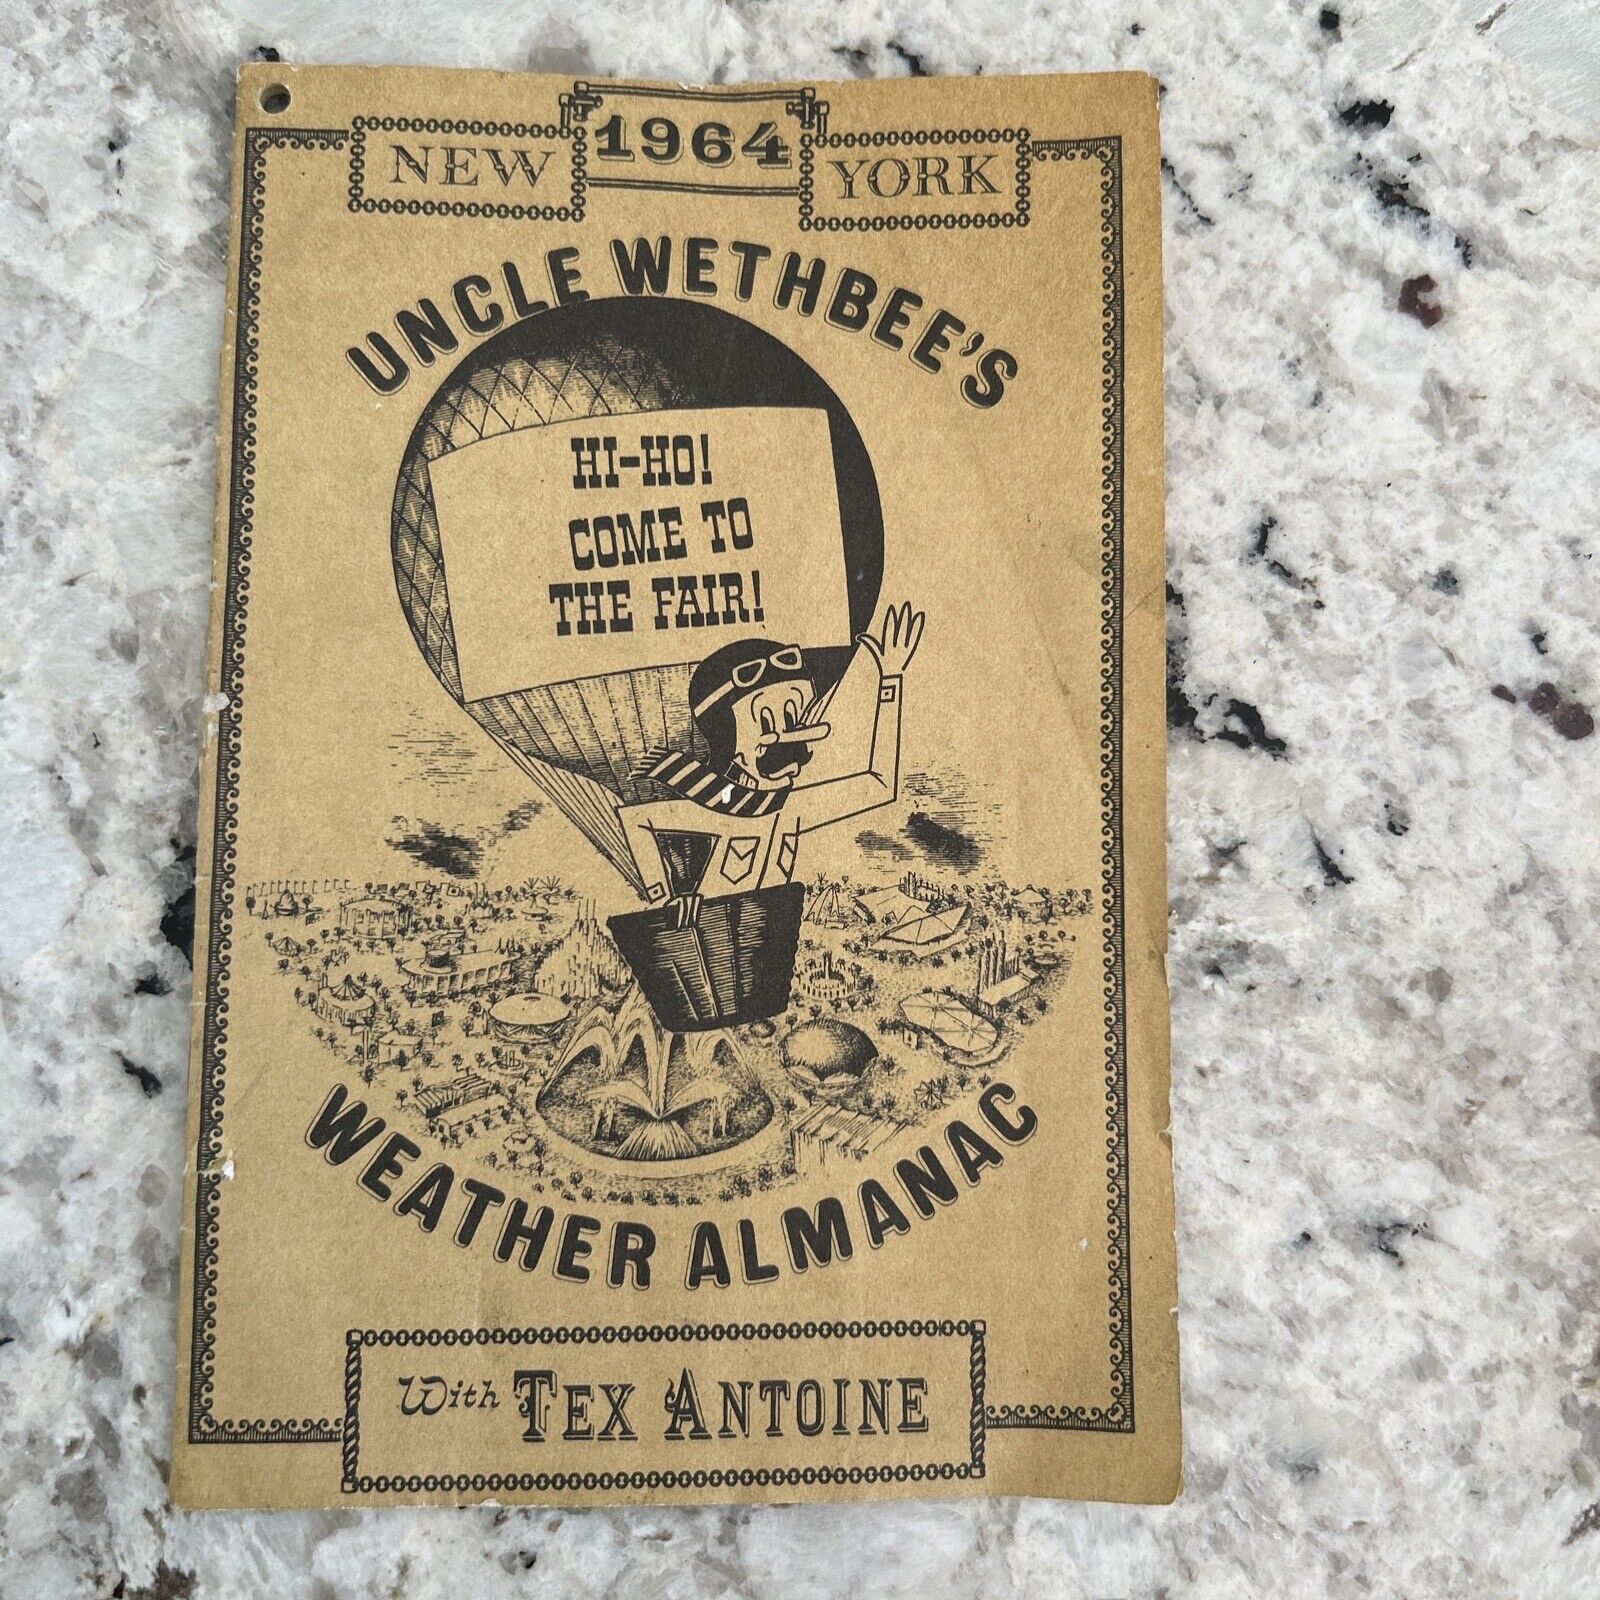 1964 New York  UNCLE WETHBEE\'S Weather Almanac with Tex Antoine ￼￼to The Fair